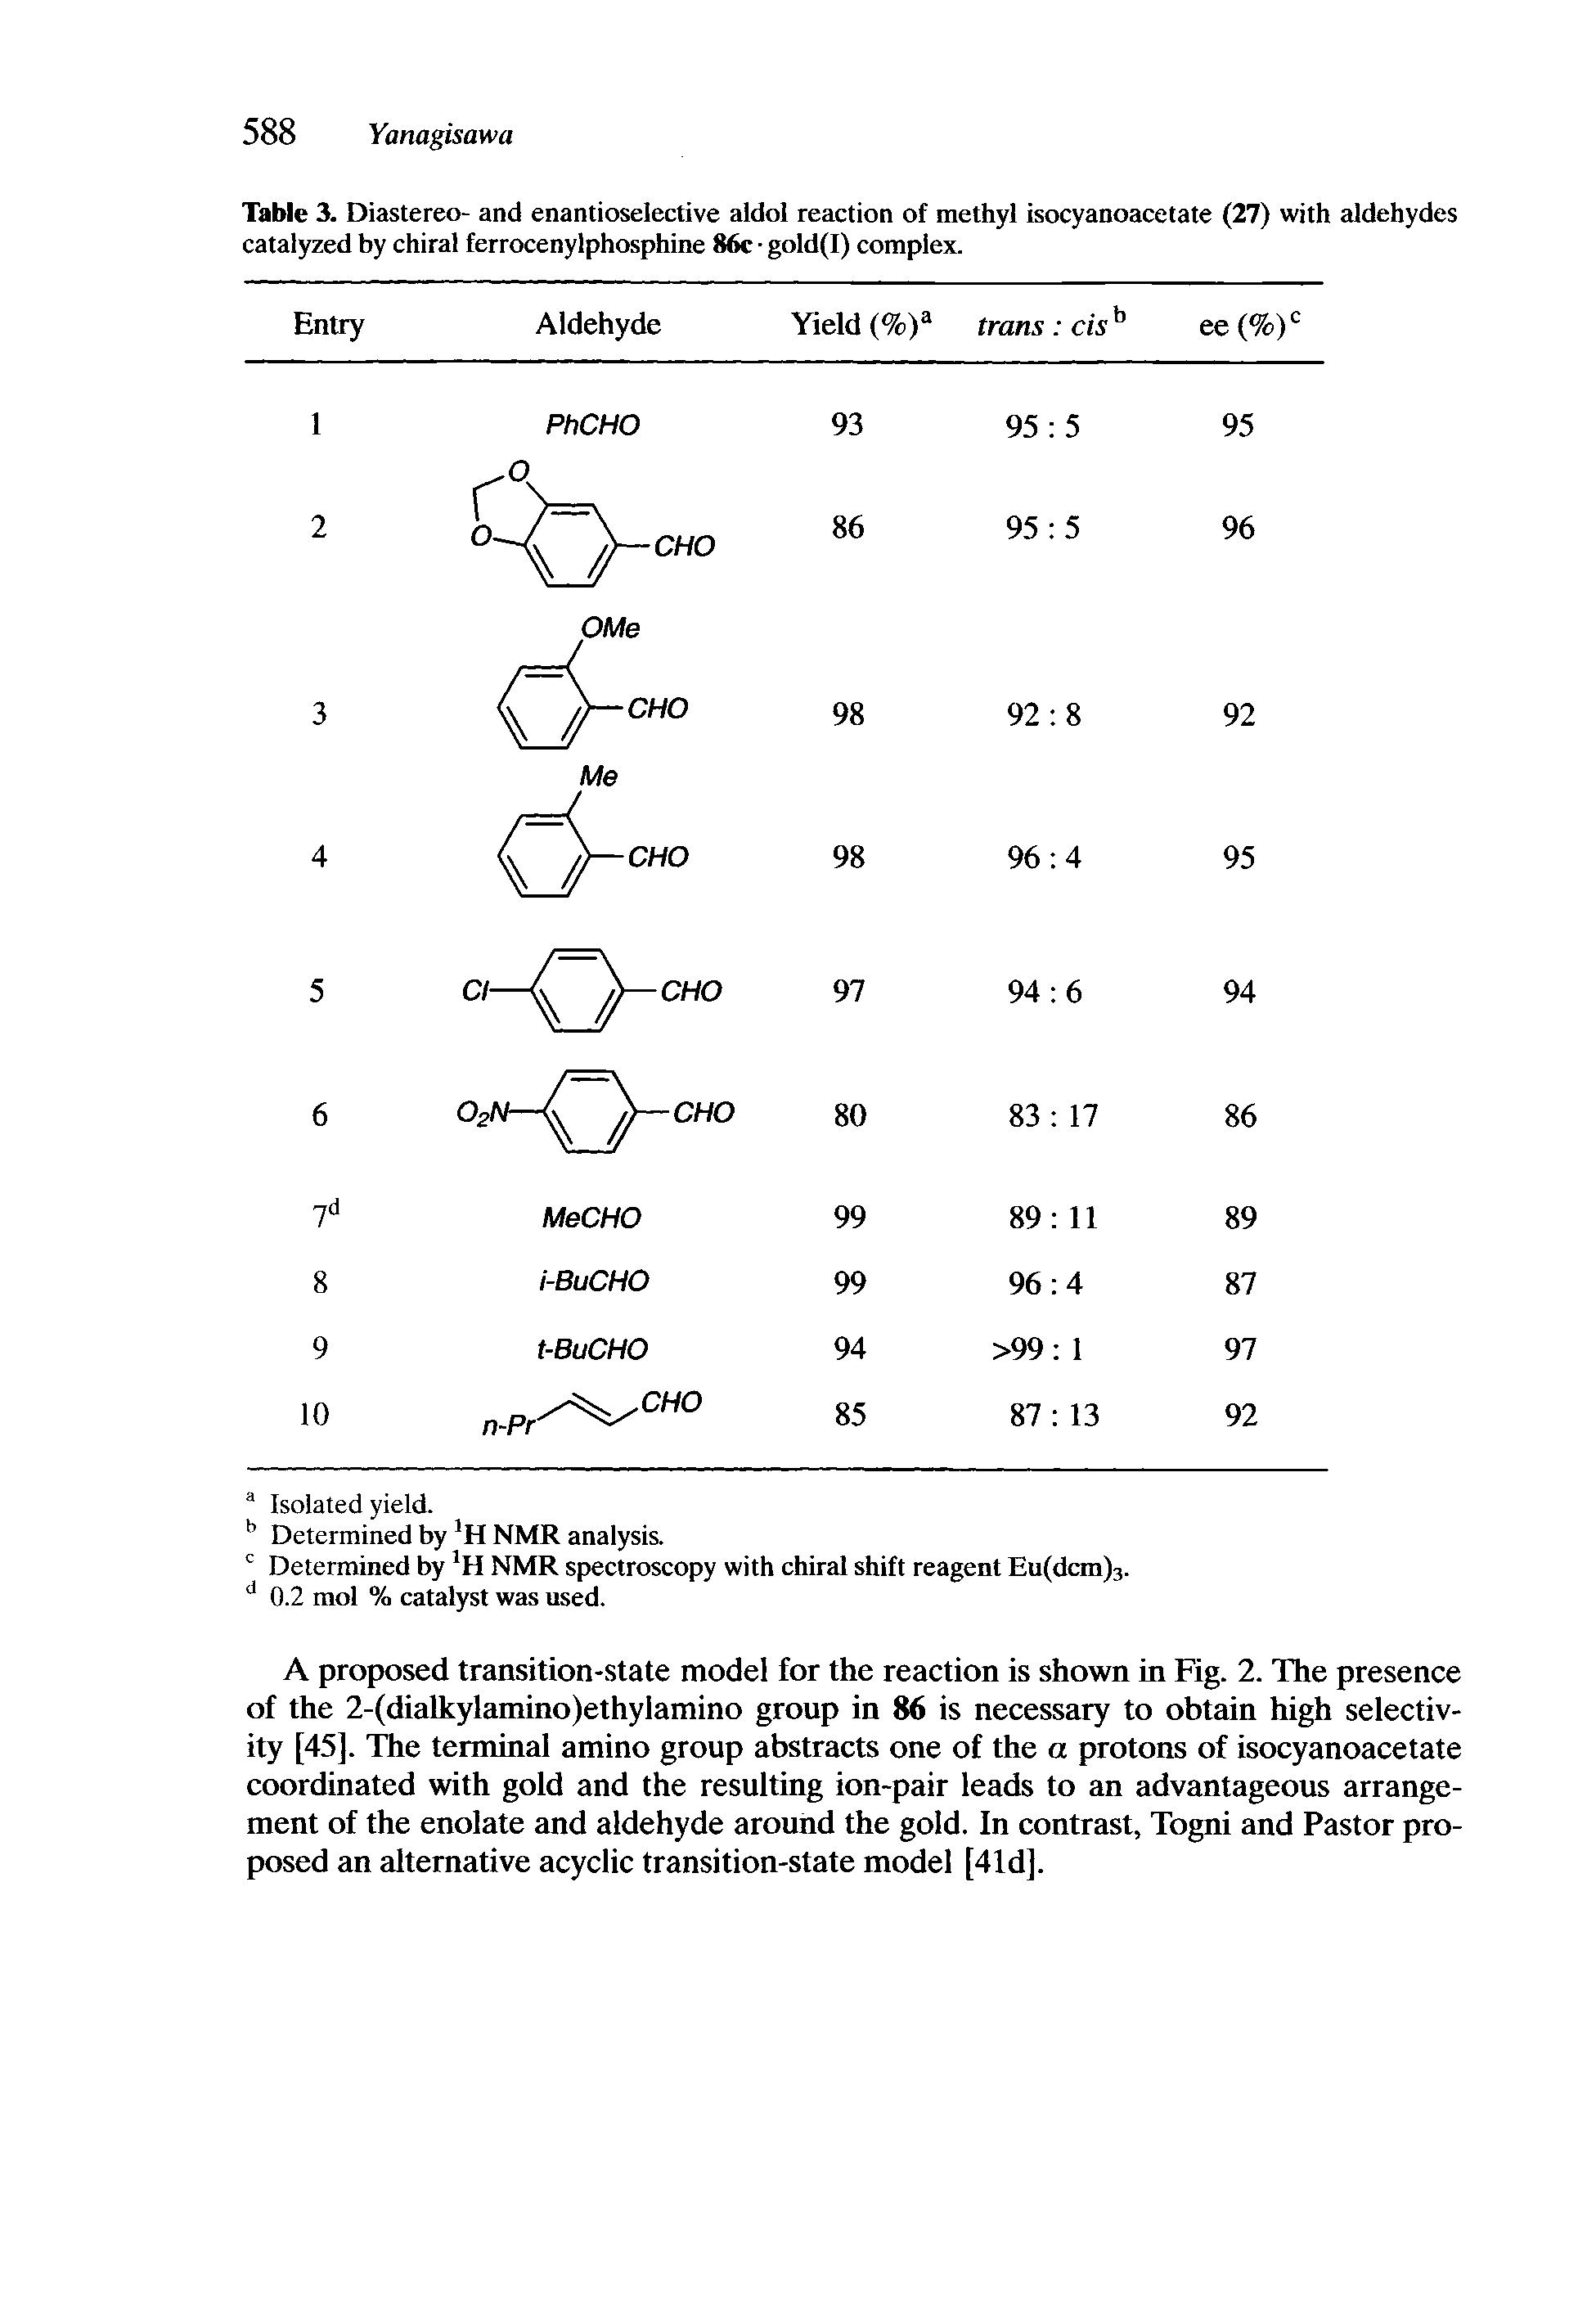 Table 3. Diastereo- and enantioselective aldol reaction of methyl isocyanoacetate (27) with tildehydes catalyzed by chiral ferrocenylphosphine 86c gold(I) complex.